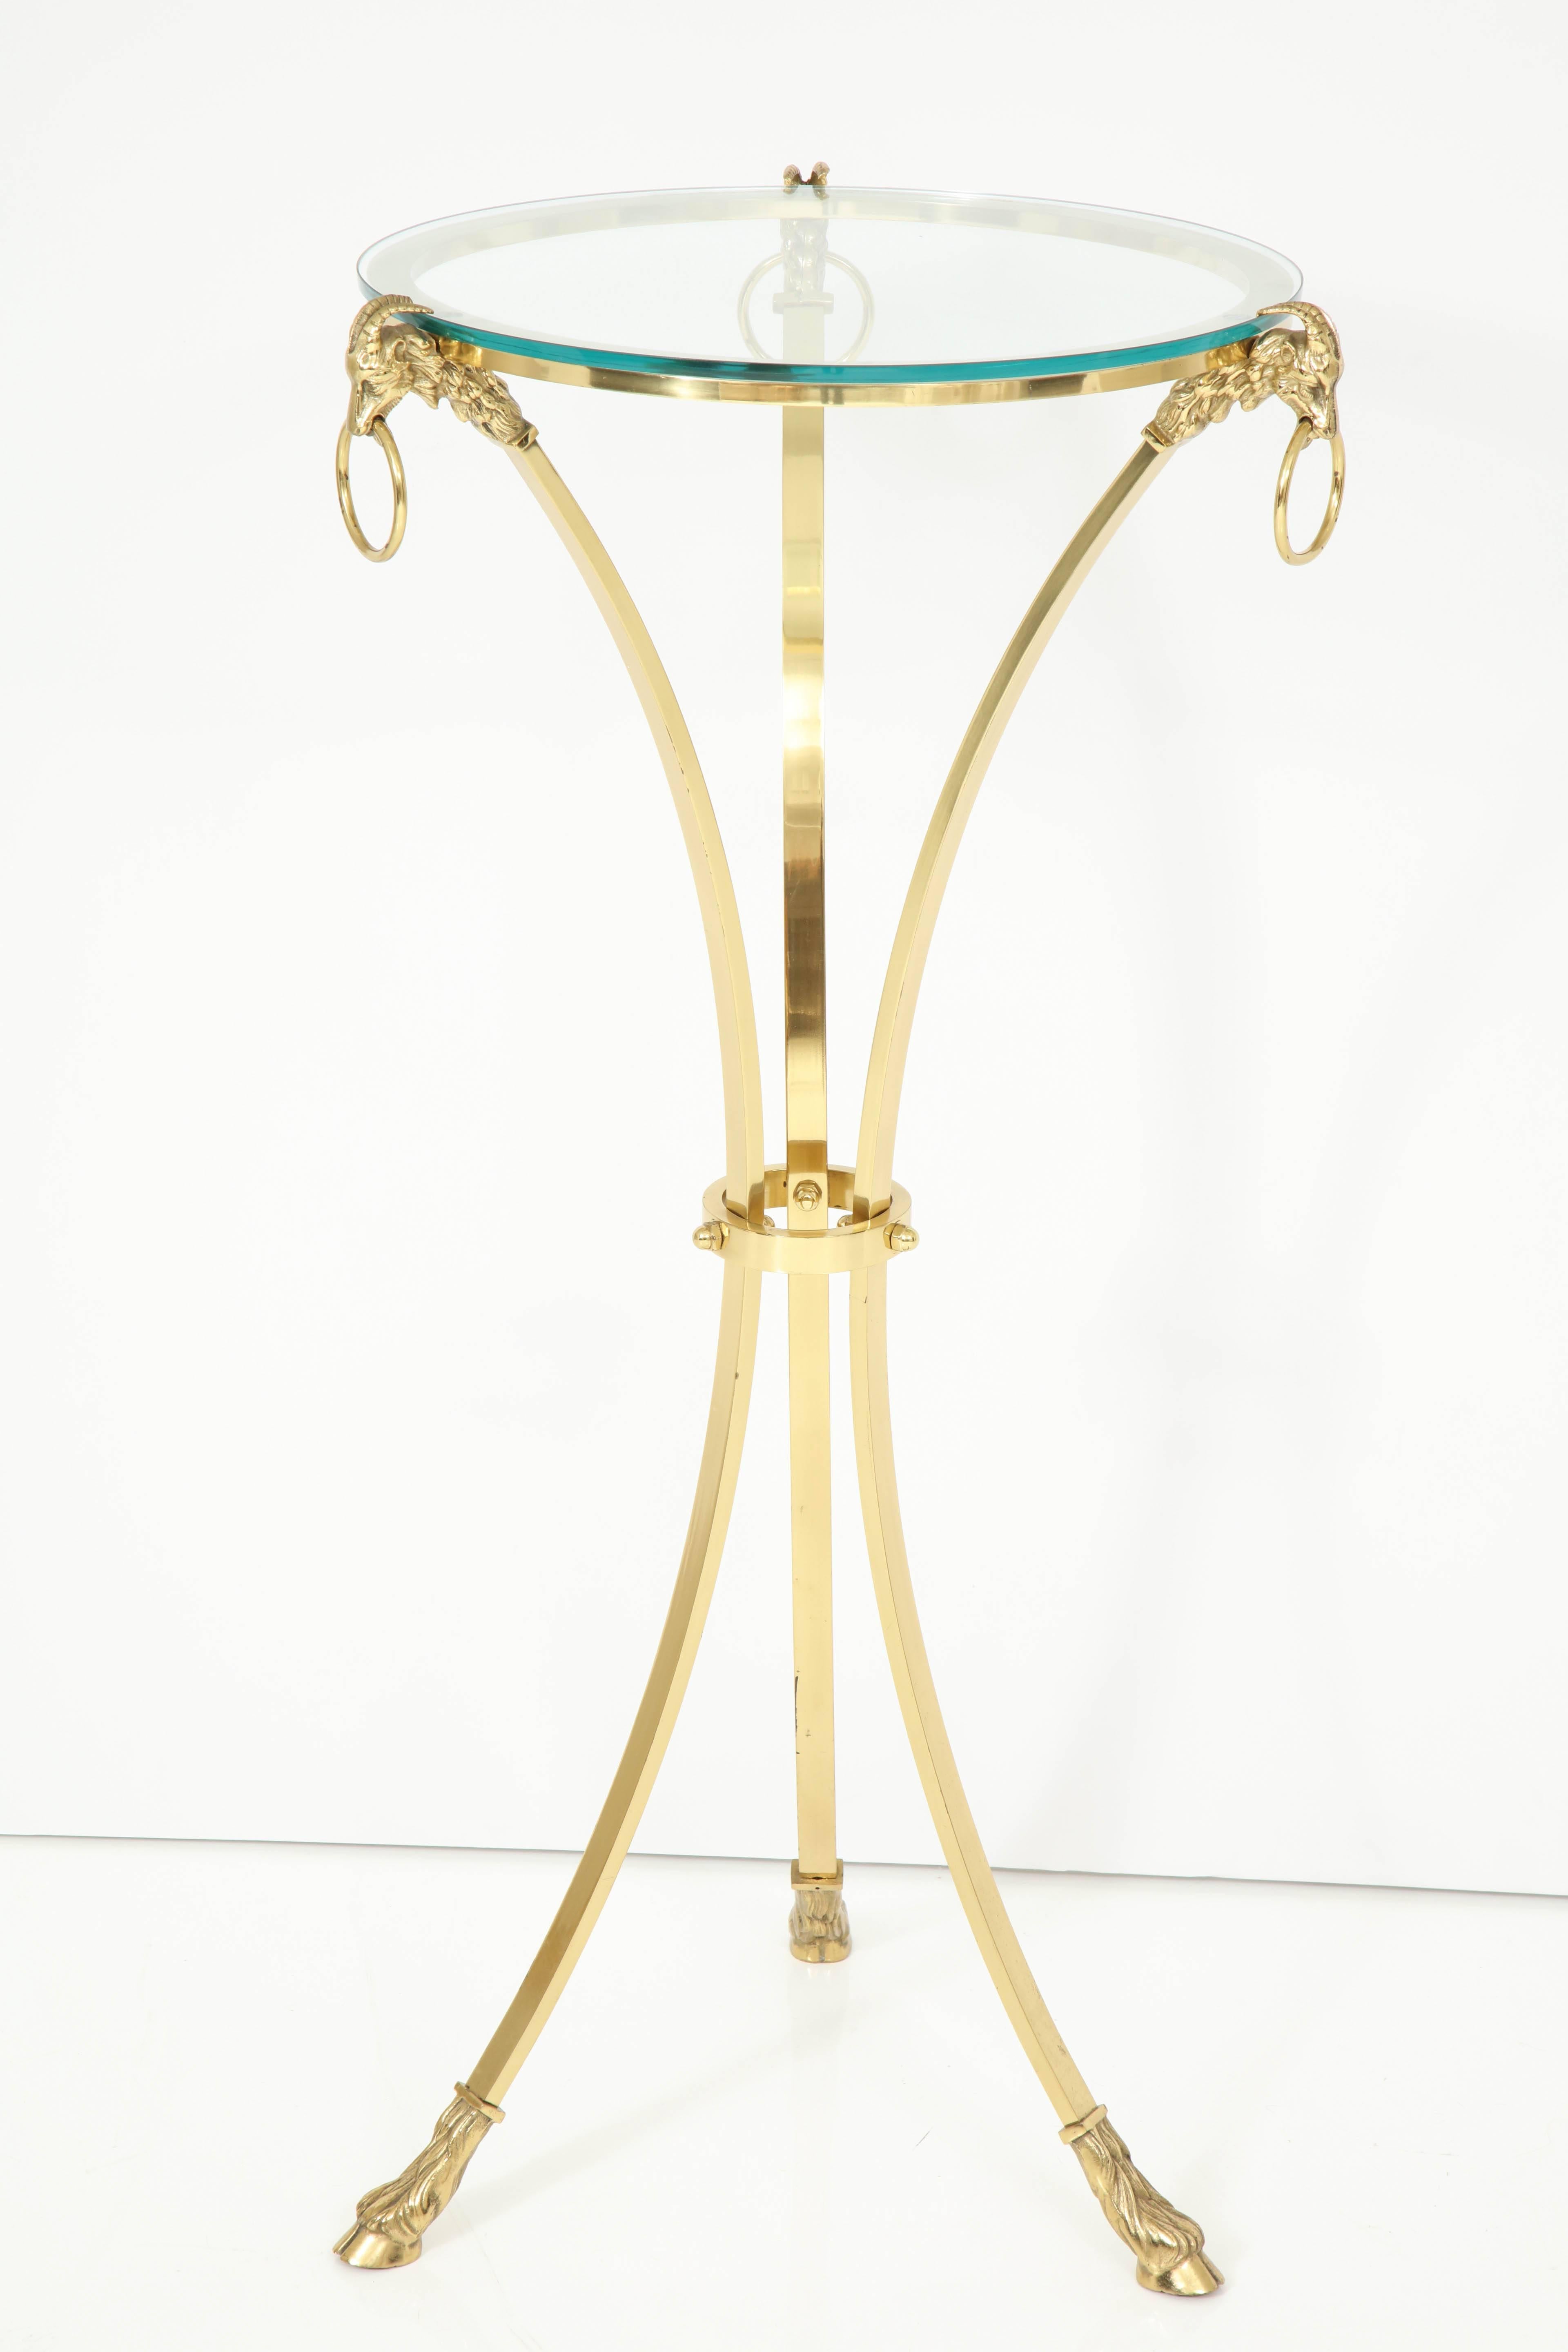 A midcentury side table attributed to Maison Charles, with glass top is supported by three brass legs detailed with rope banding and hooved feet.